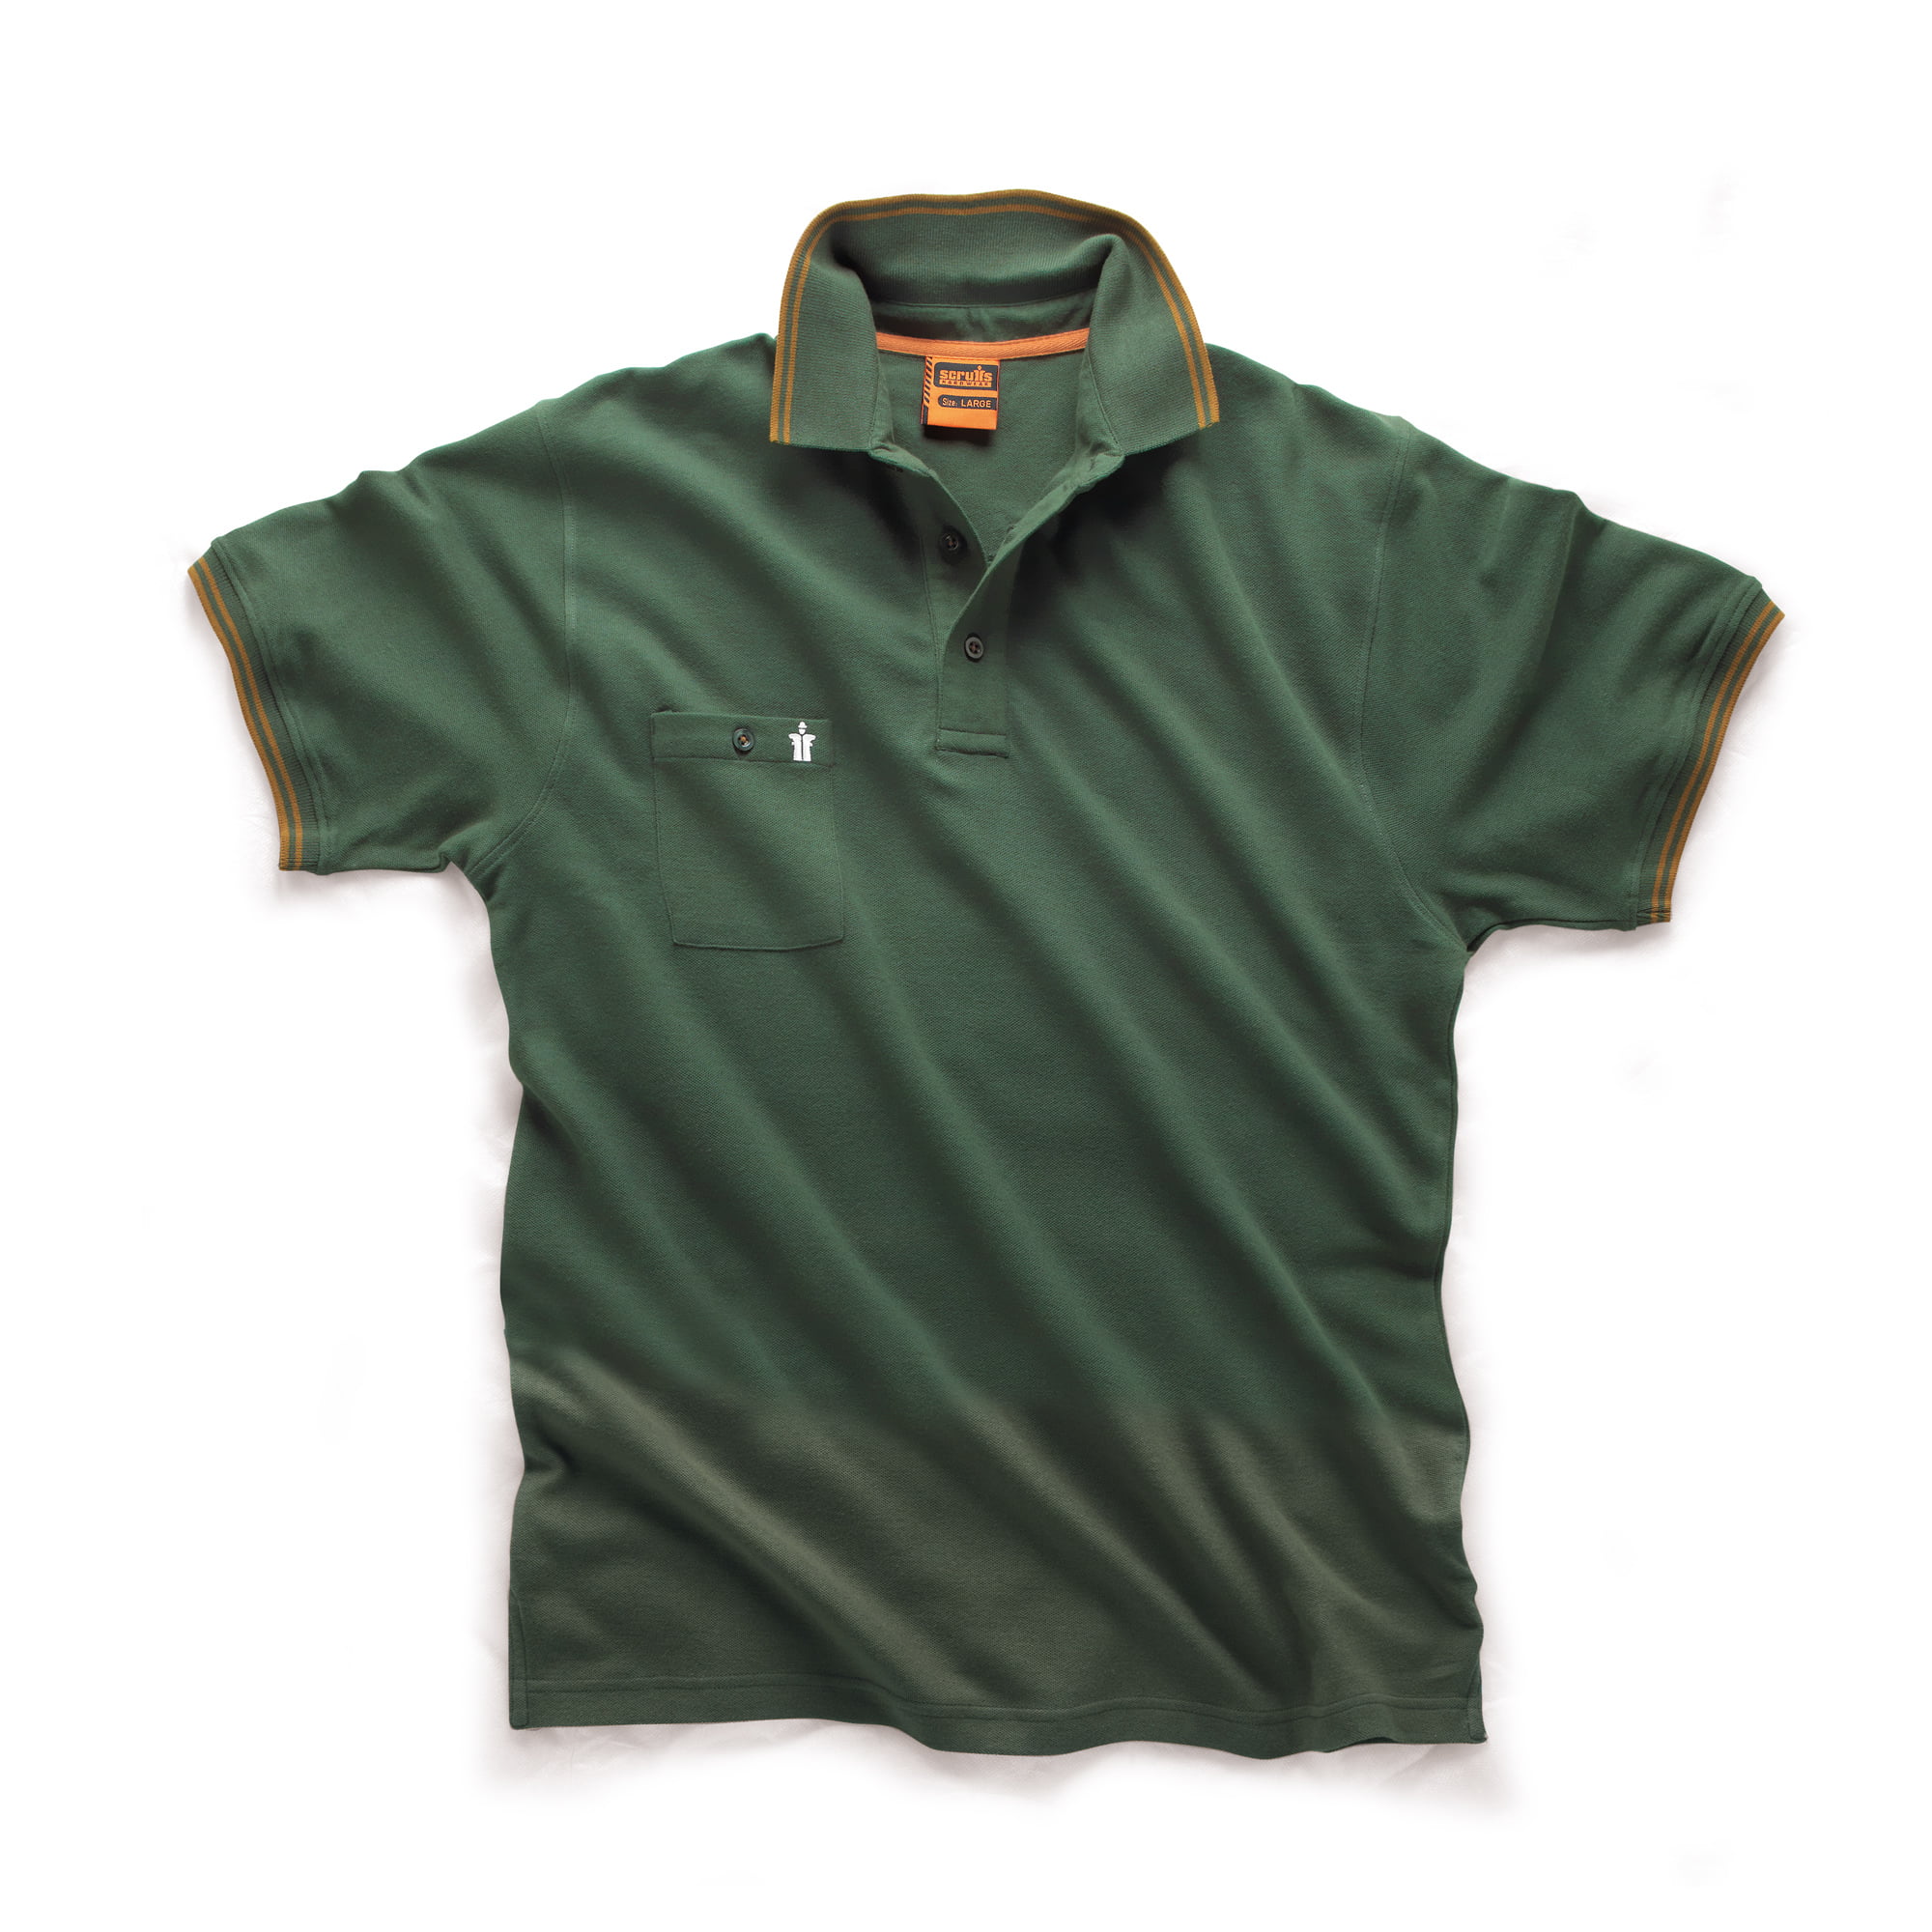 Scruffs dark green polo with orange sleeve and collar detail